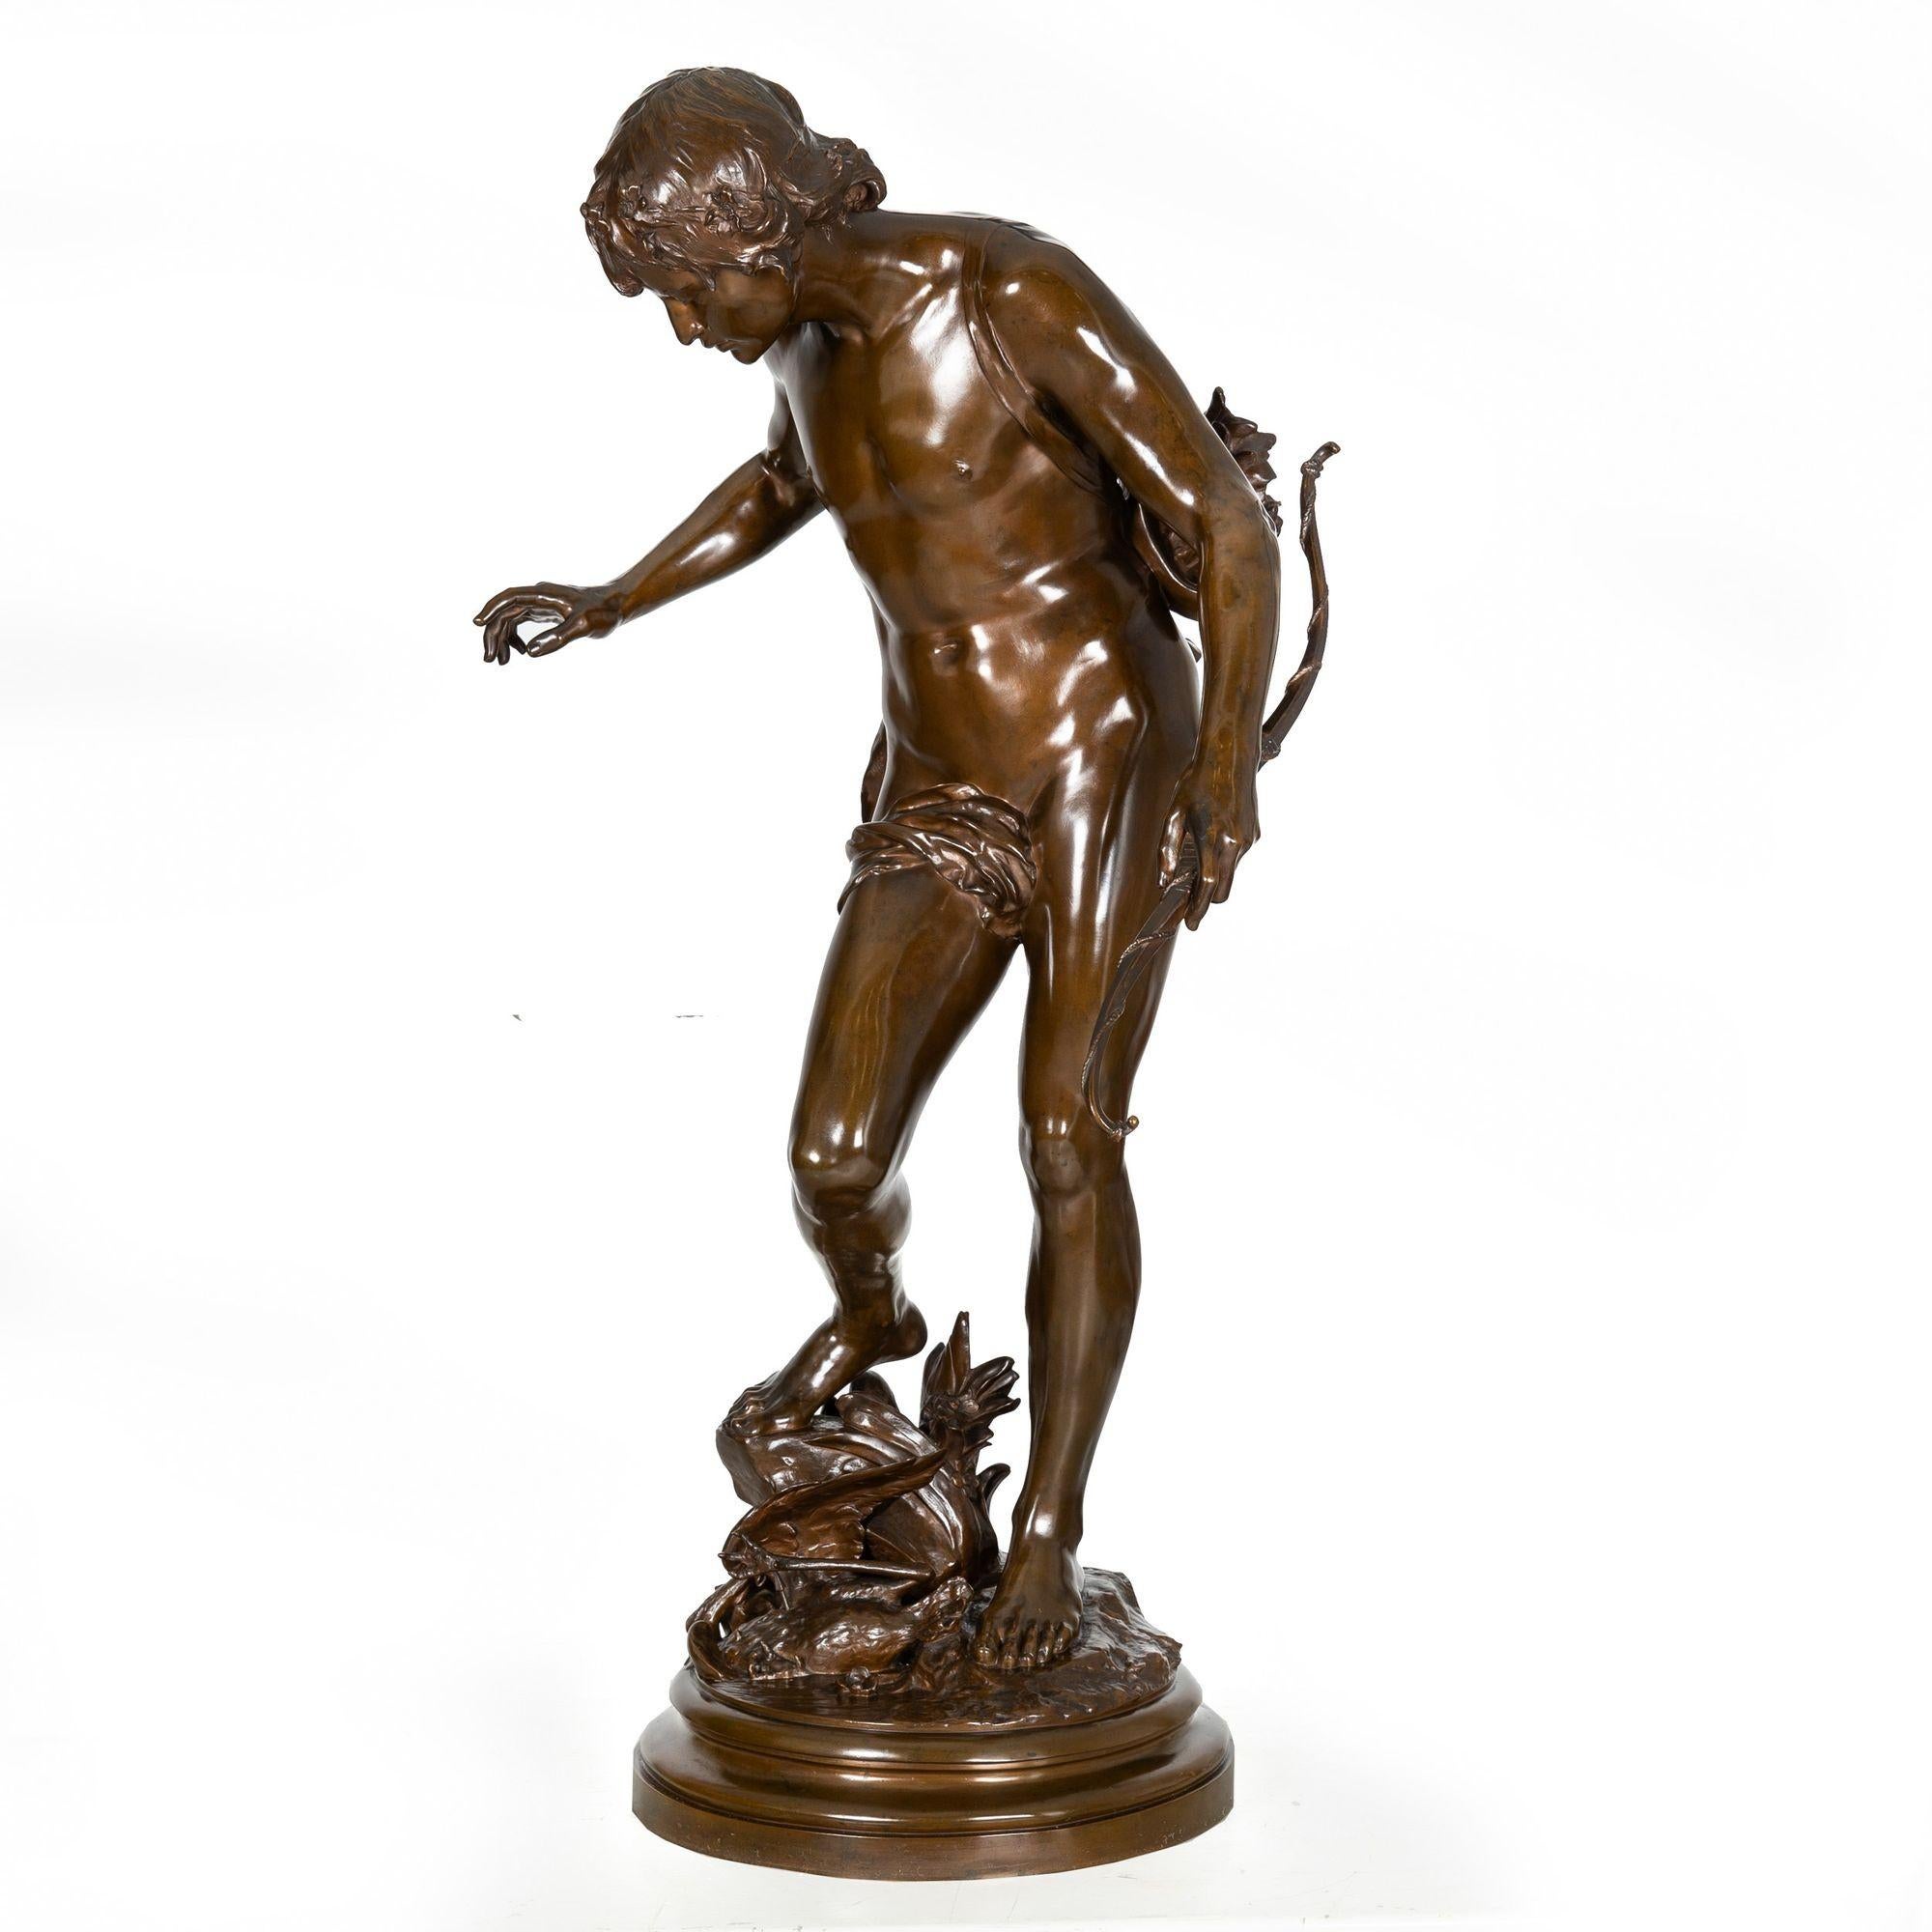 It is self-evident why this model was awarded a silver medal in the Salon of 1888 (no. 4559) where it was presented in plaster. In this dream-like reimagining of mythogy, Eugene Quinton captures the fatal tale of Narcissus at the moment of his